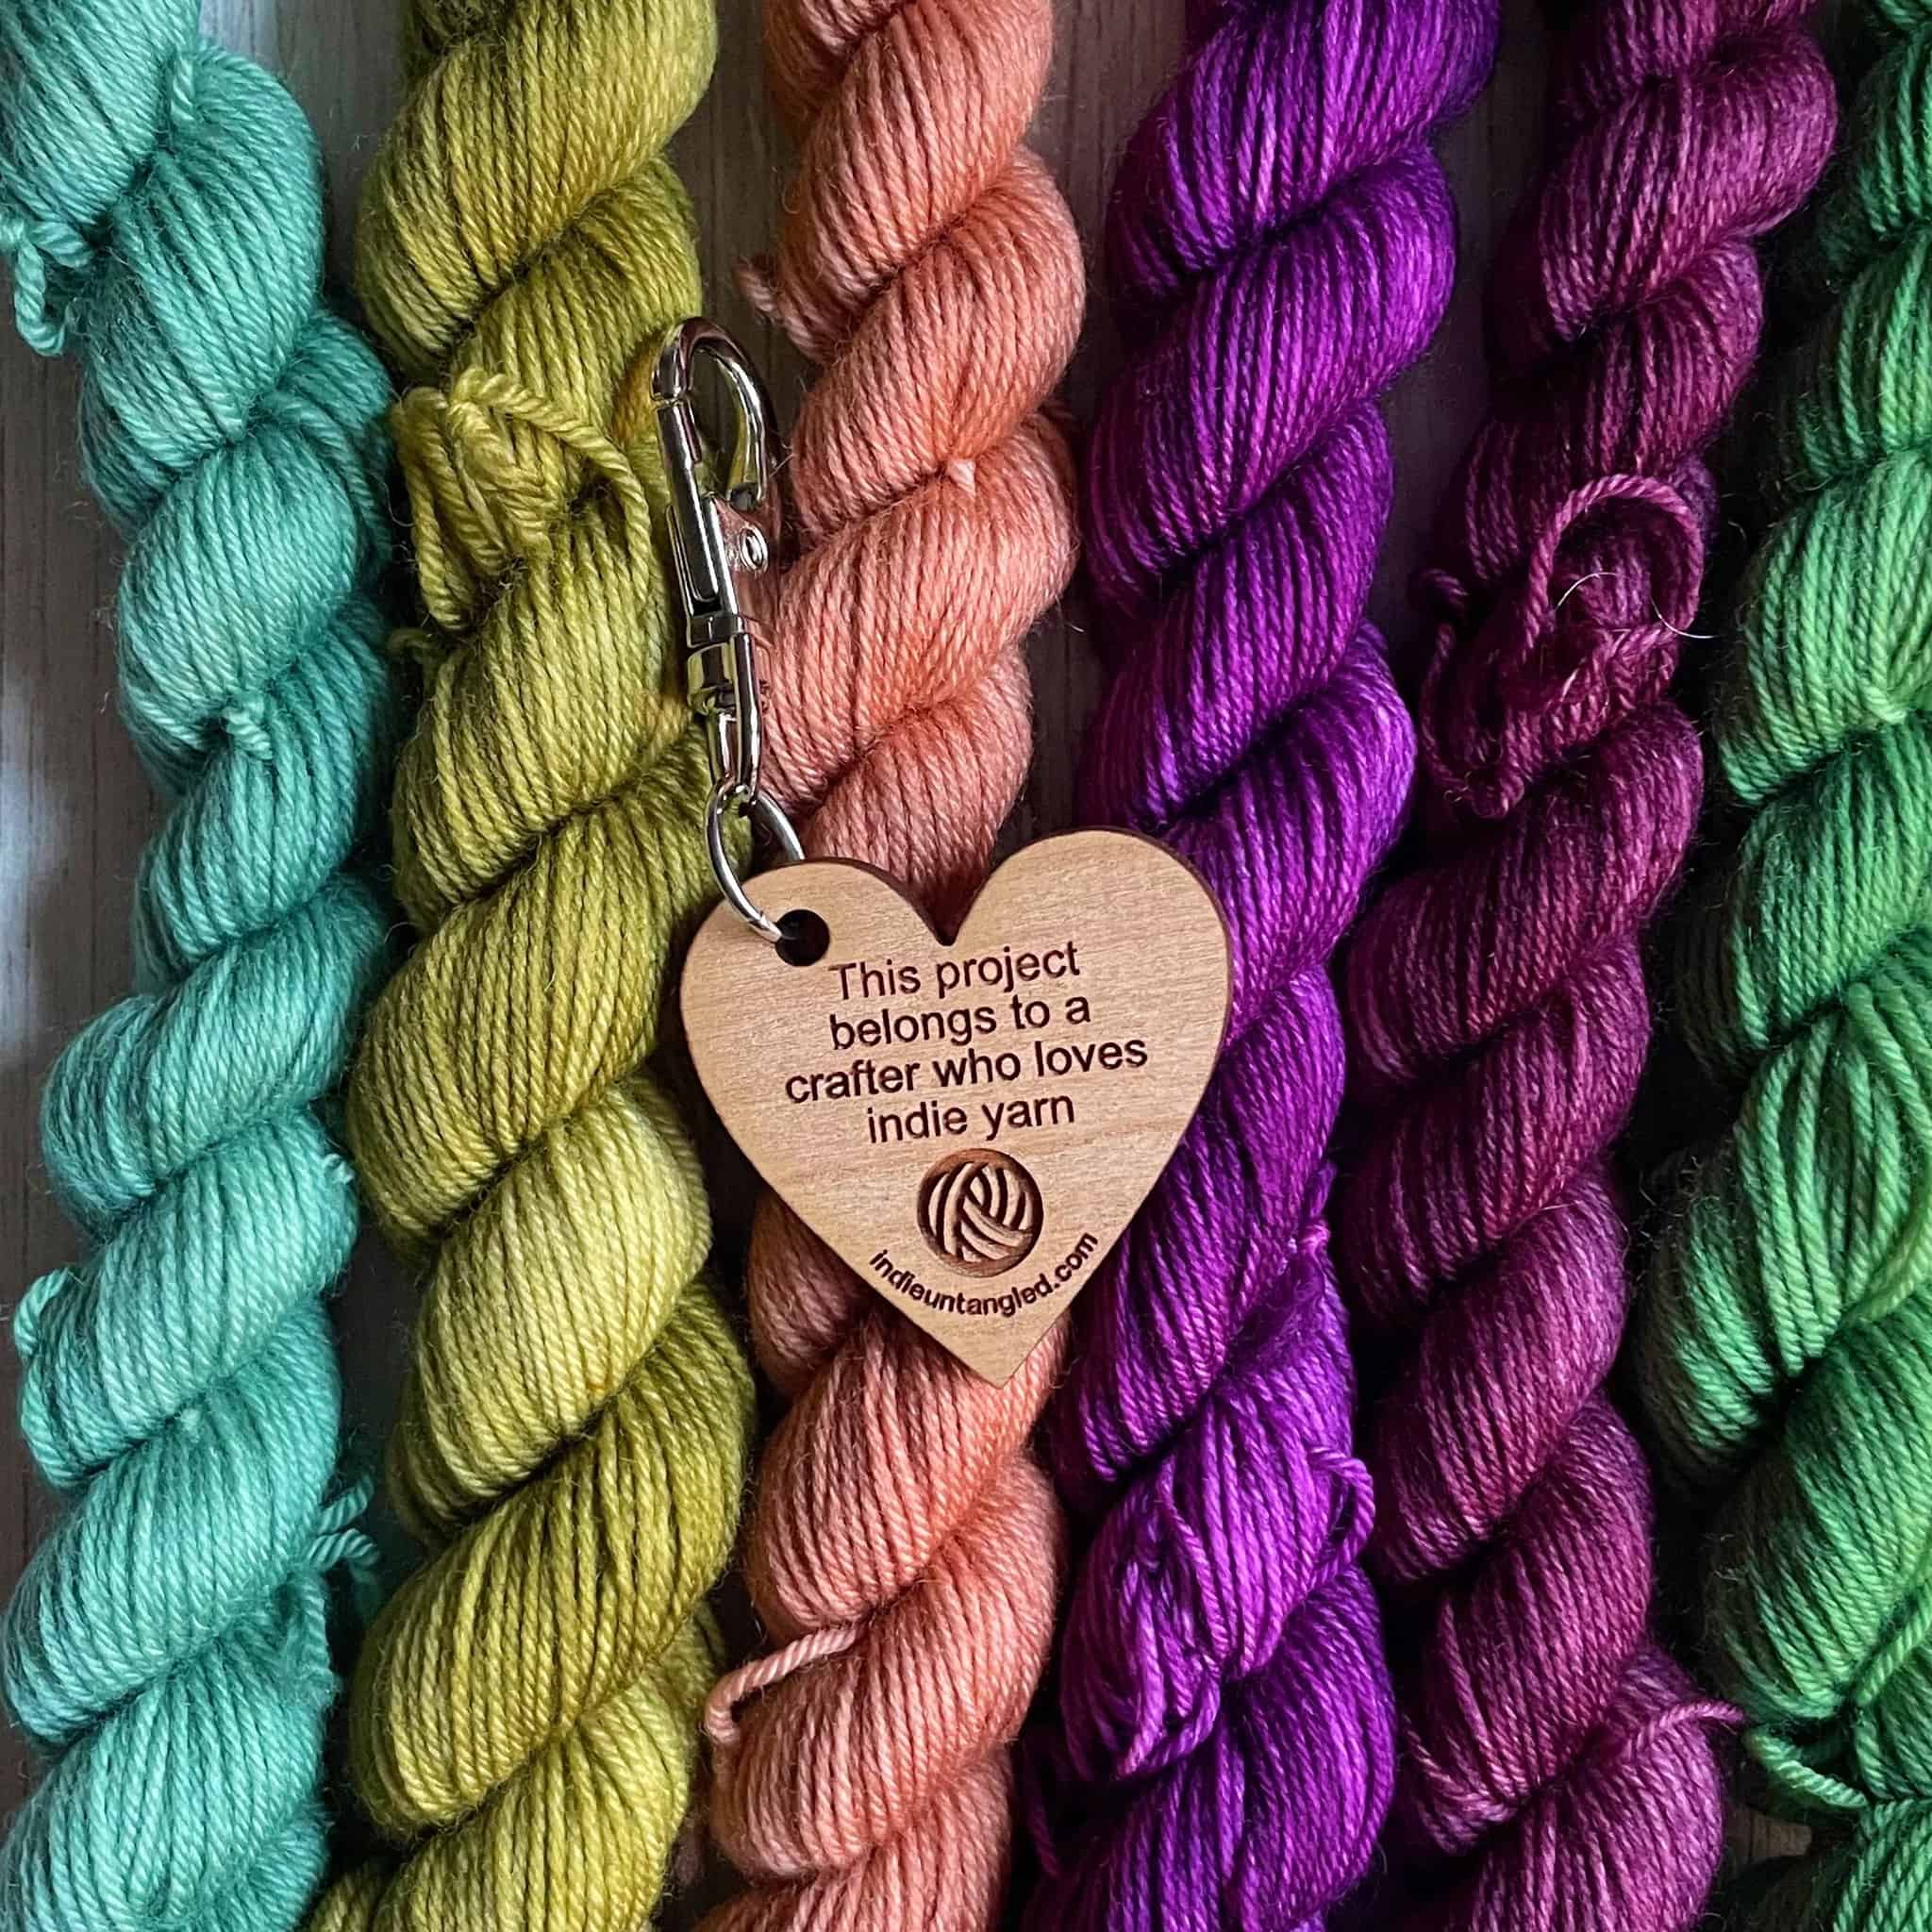 A wooden fob in the shape of a heart engraved with the words This project belongs to a crafter who loves indie yarn.